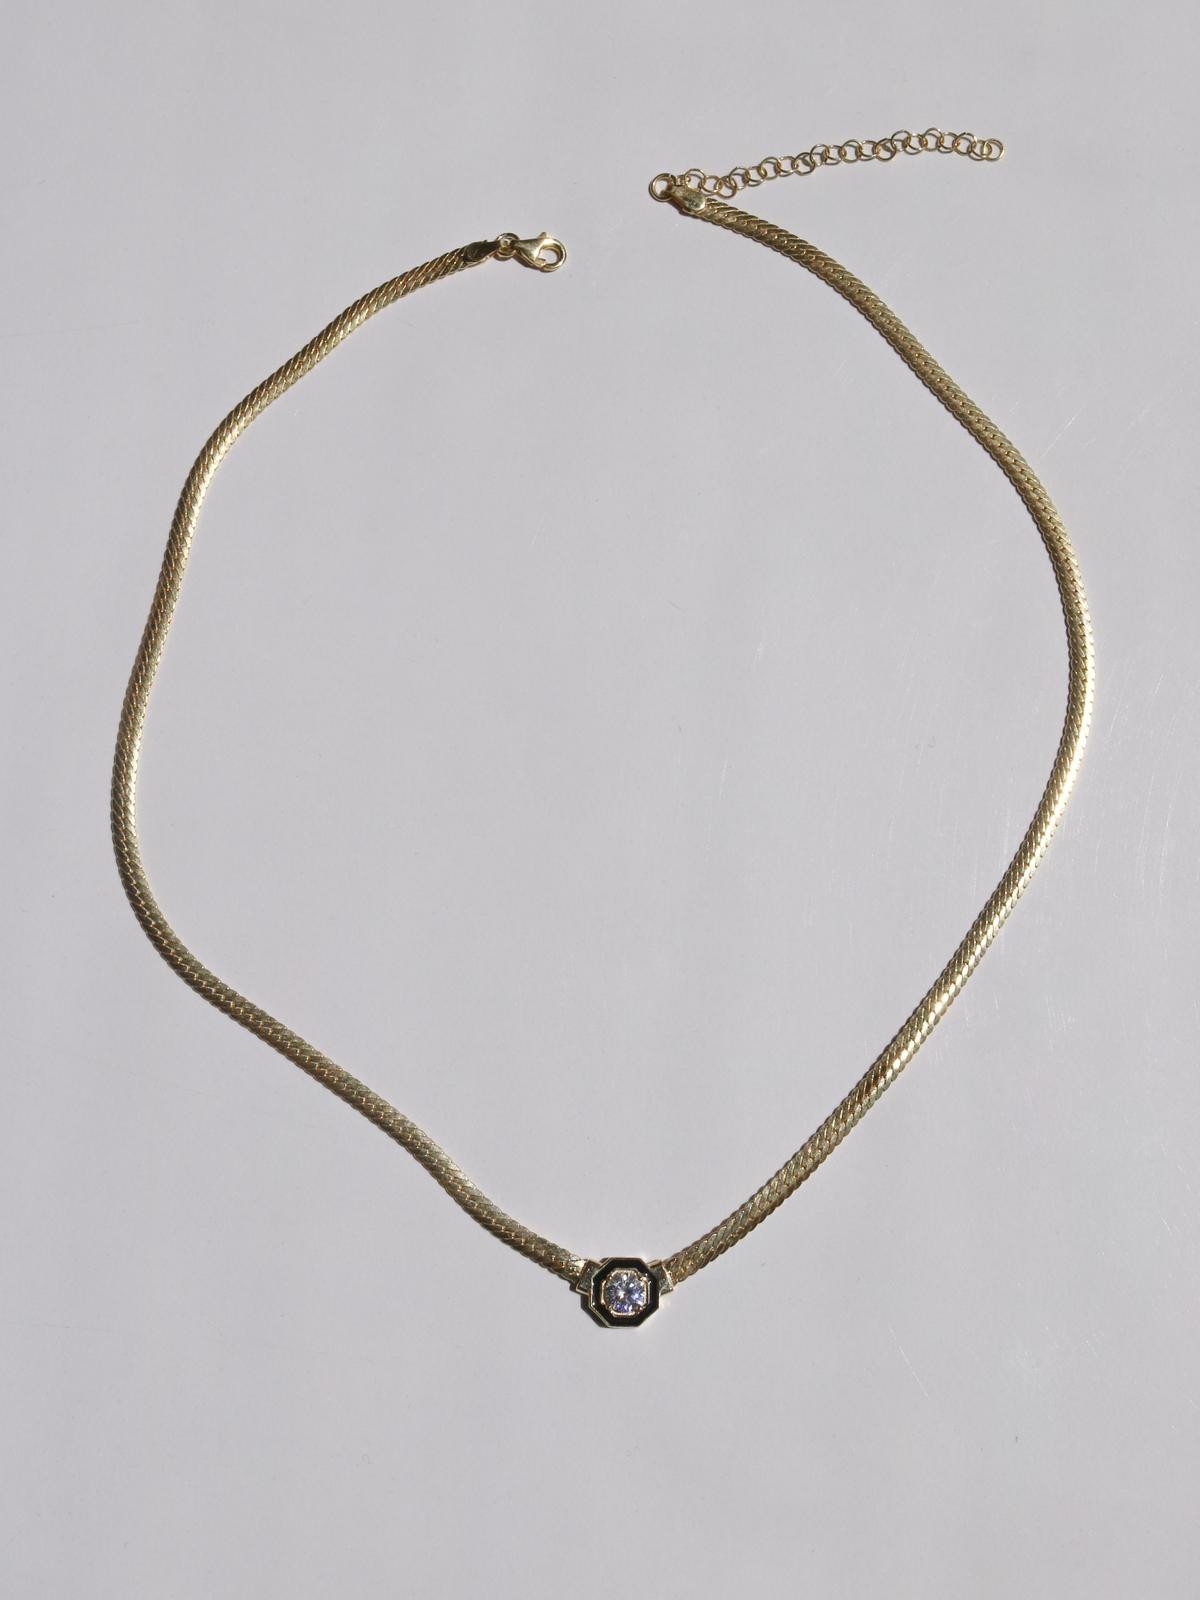 Who Came, Who Passed Serenay Necklace 925 Silver